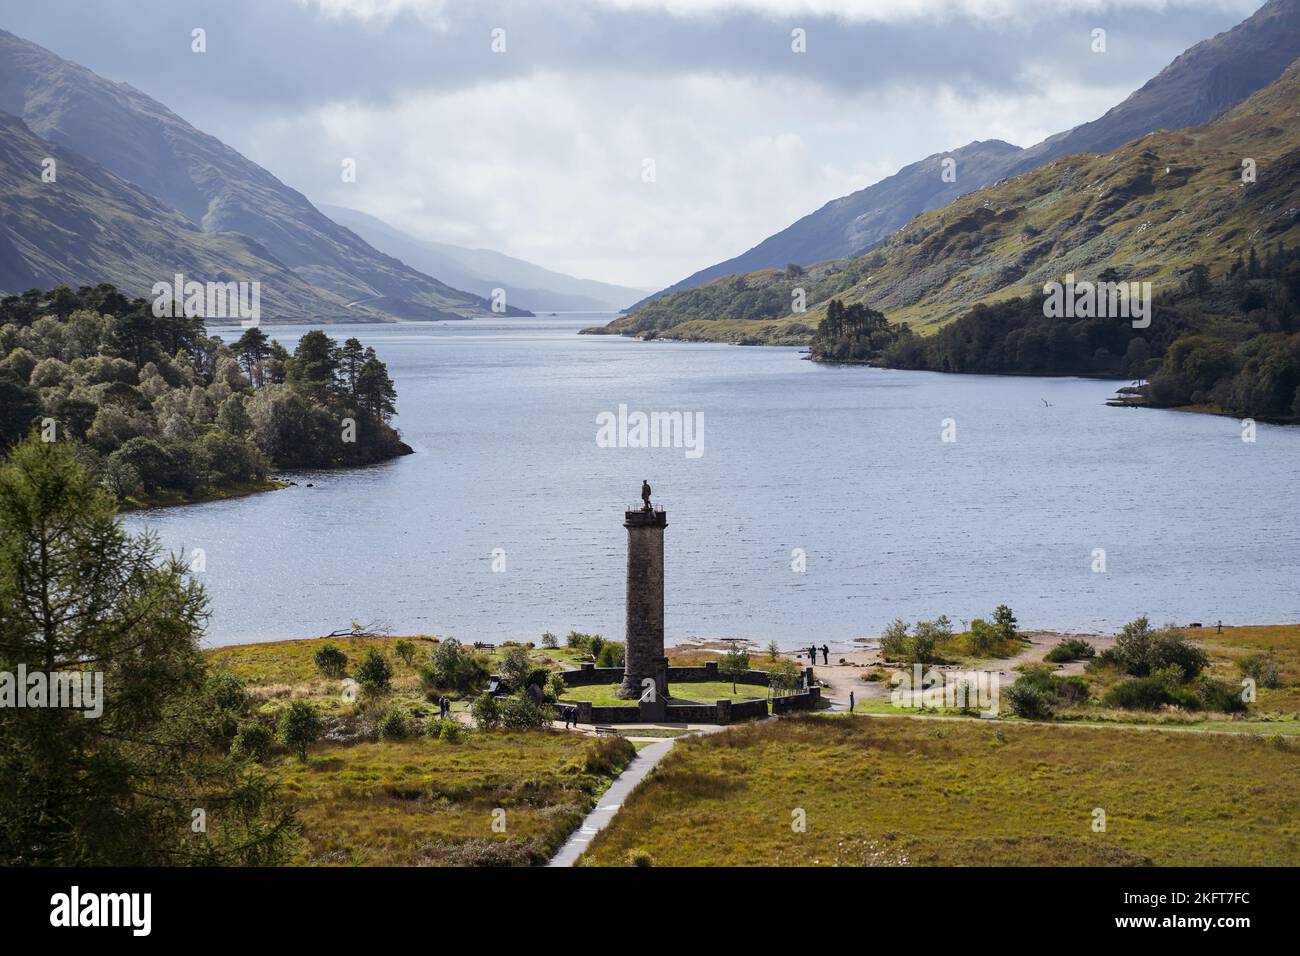 Scenic view of old Glenfinnan Monument located on shore of lake in Scotland surrounded by hills and green trees Stock Photo